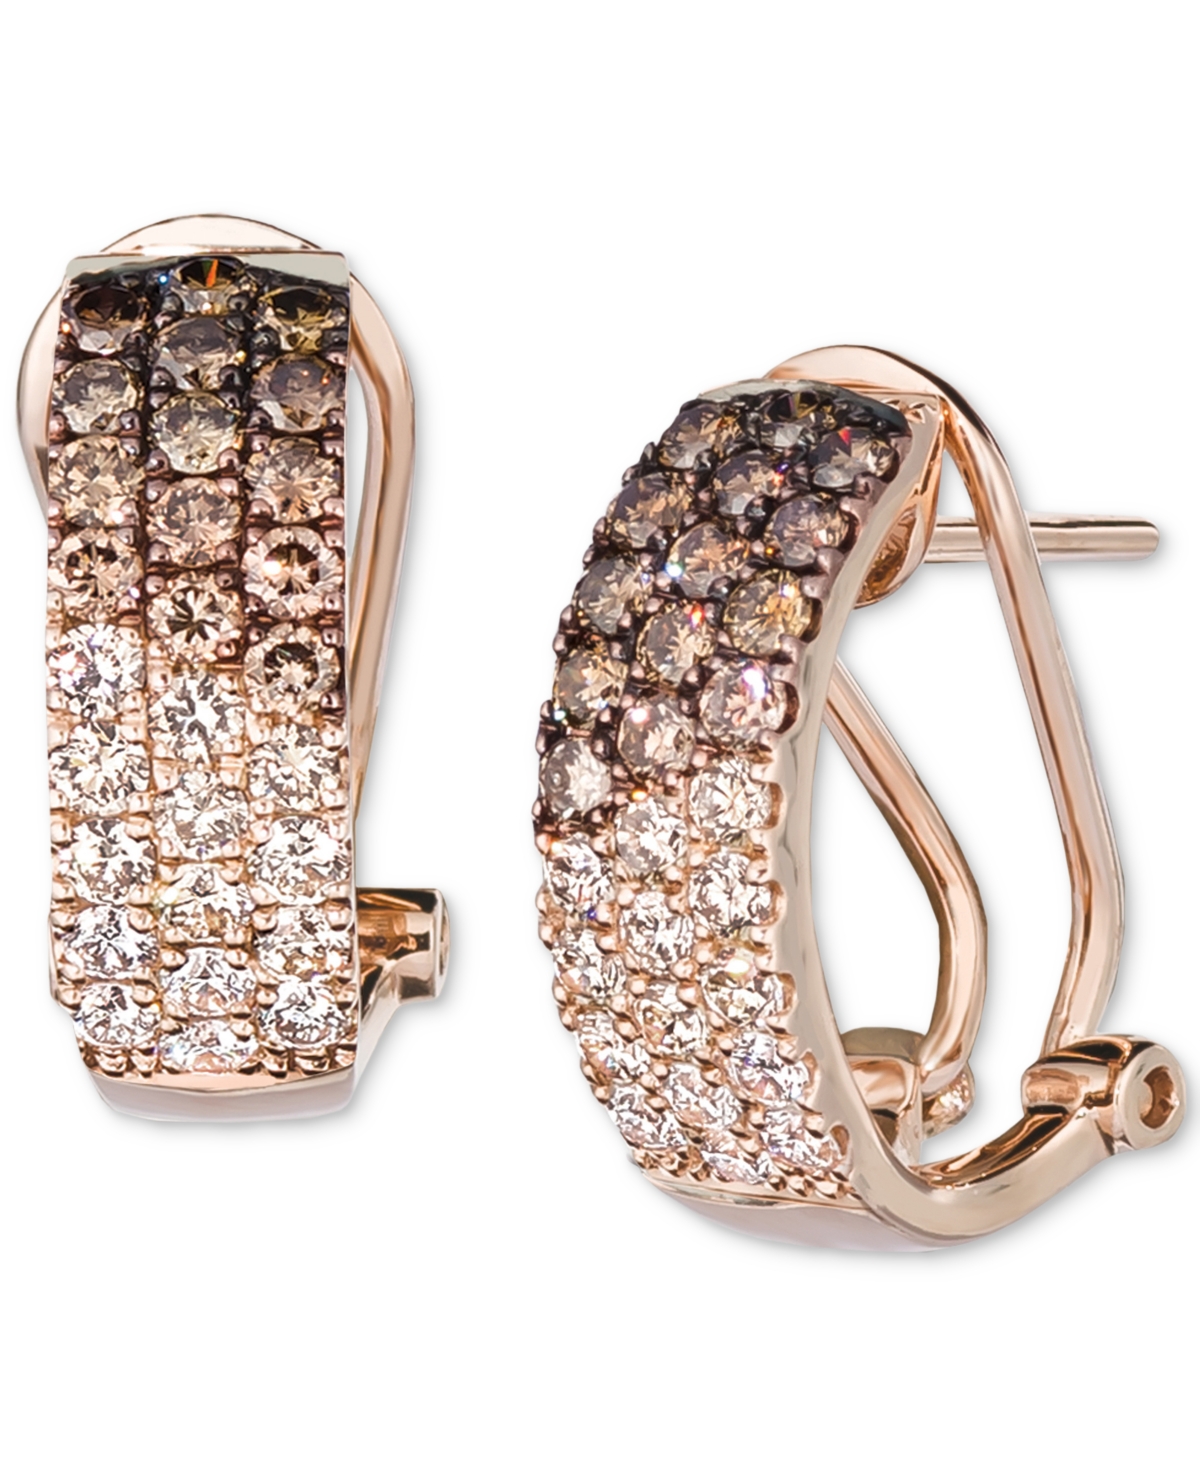 Ombre Chocolate Diamond & Nude Diamond (1-1/4 ct. t.w.) Omega Hoop Earrings in 14k Rose Gold, White Gold or Yellow Gold - White Gold